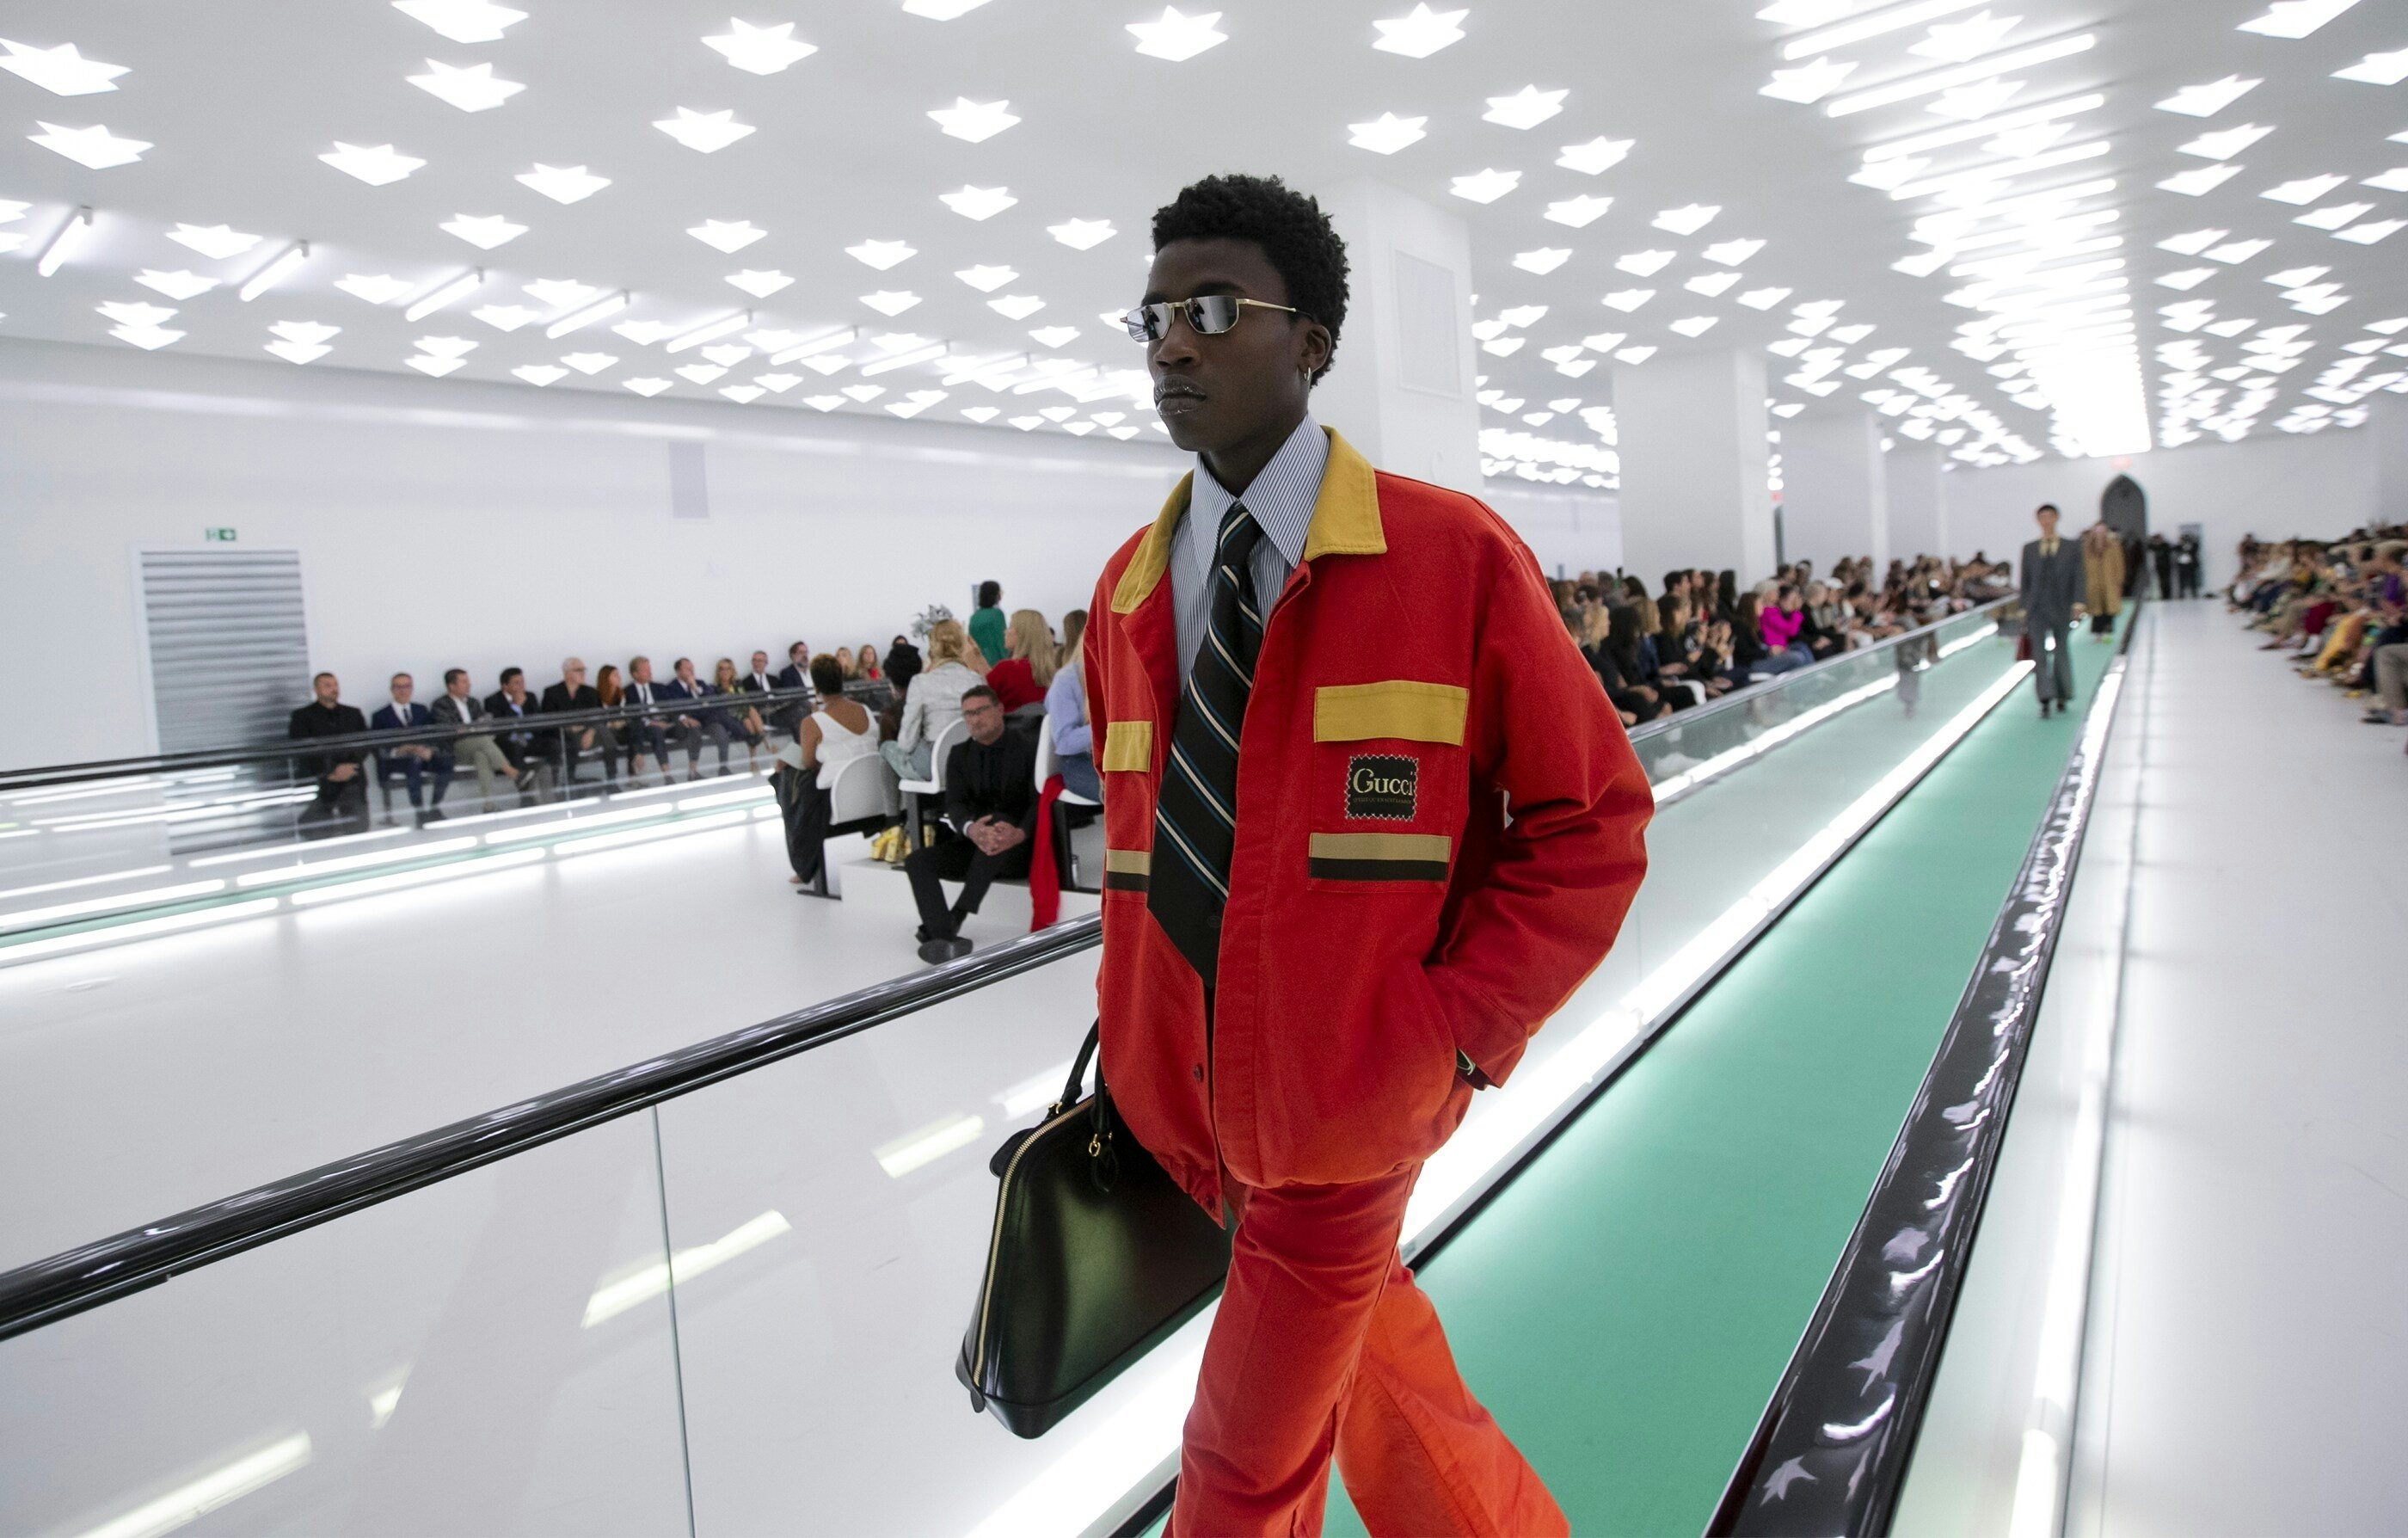 Gucci's Spring 2020 show made a bold statement about the role of fashion as a form of power and control. Photo: Gucci 